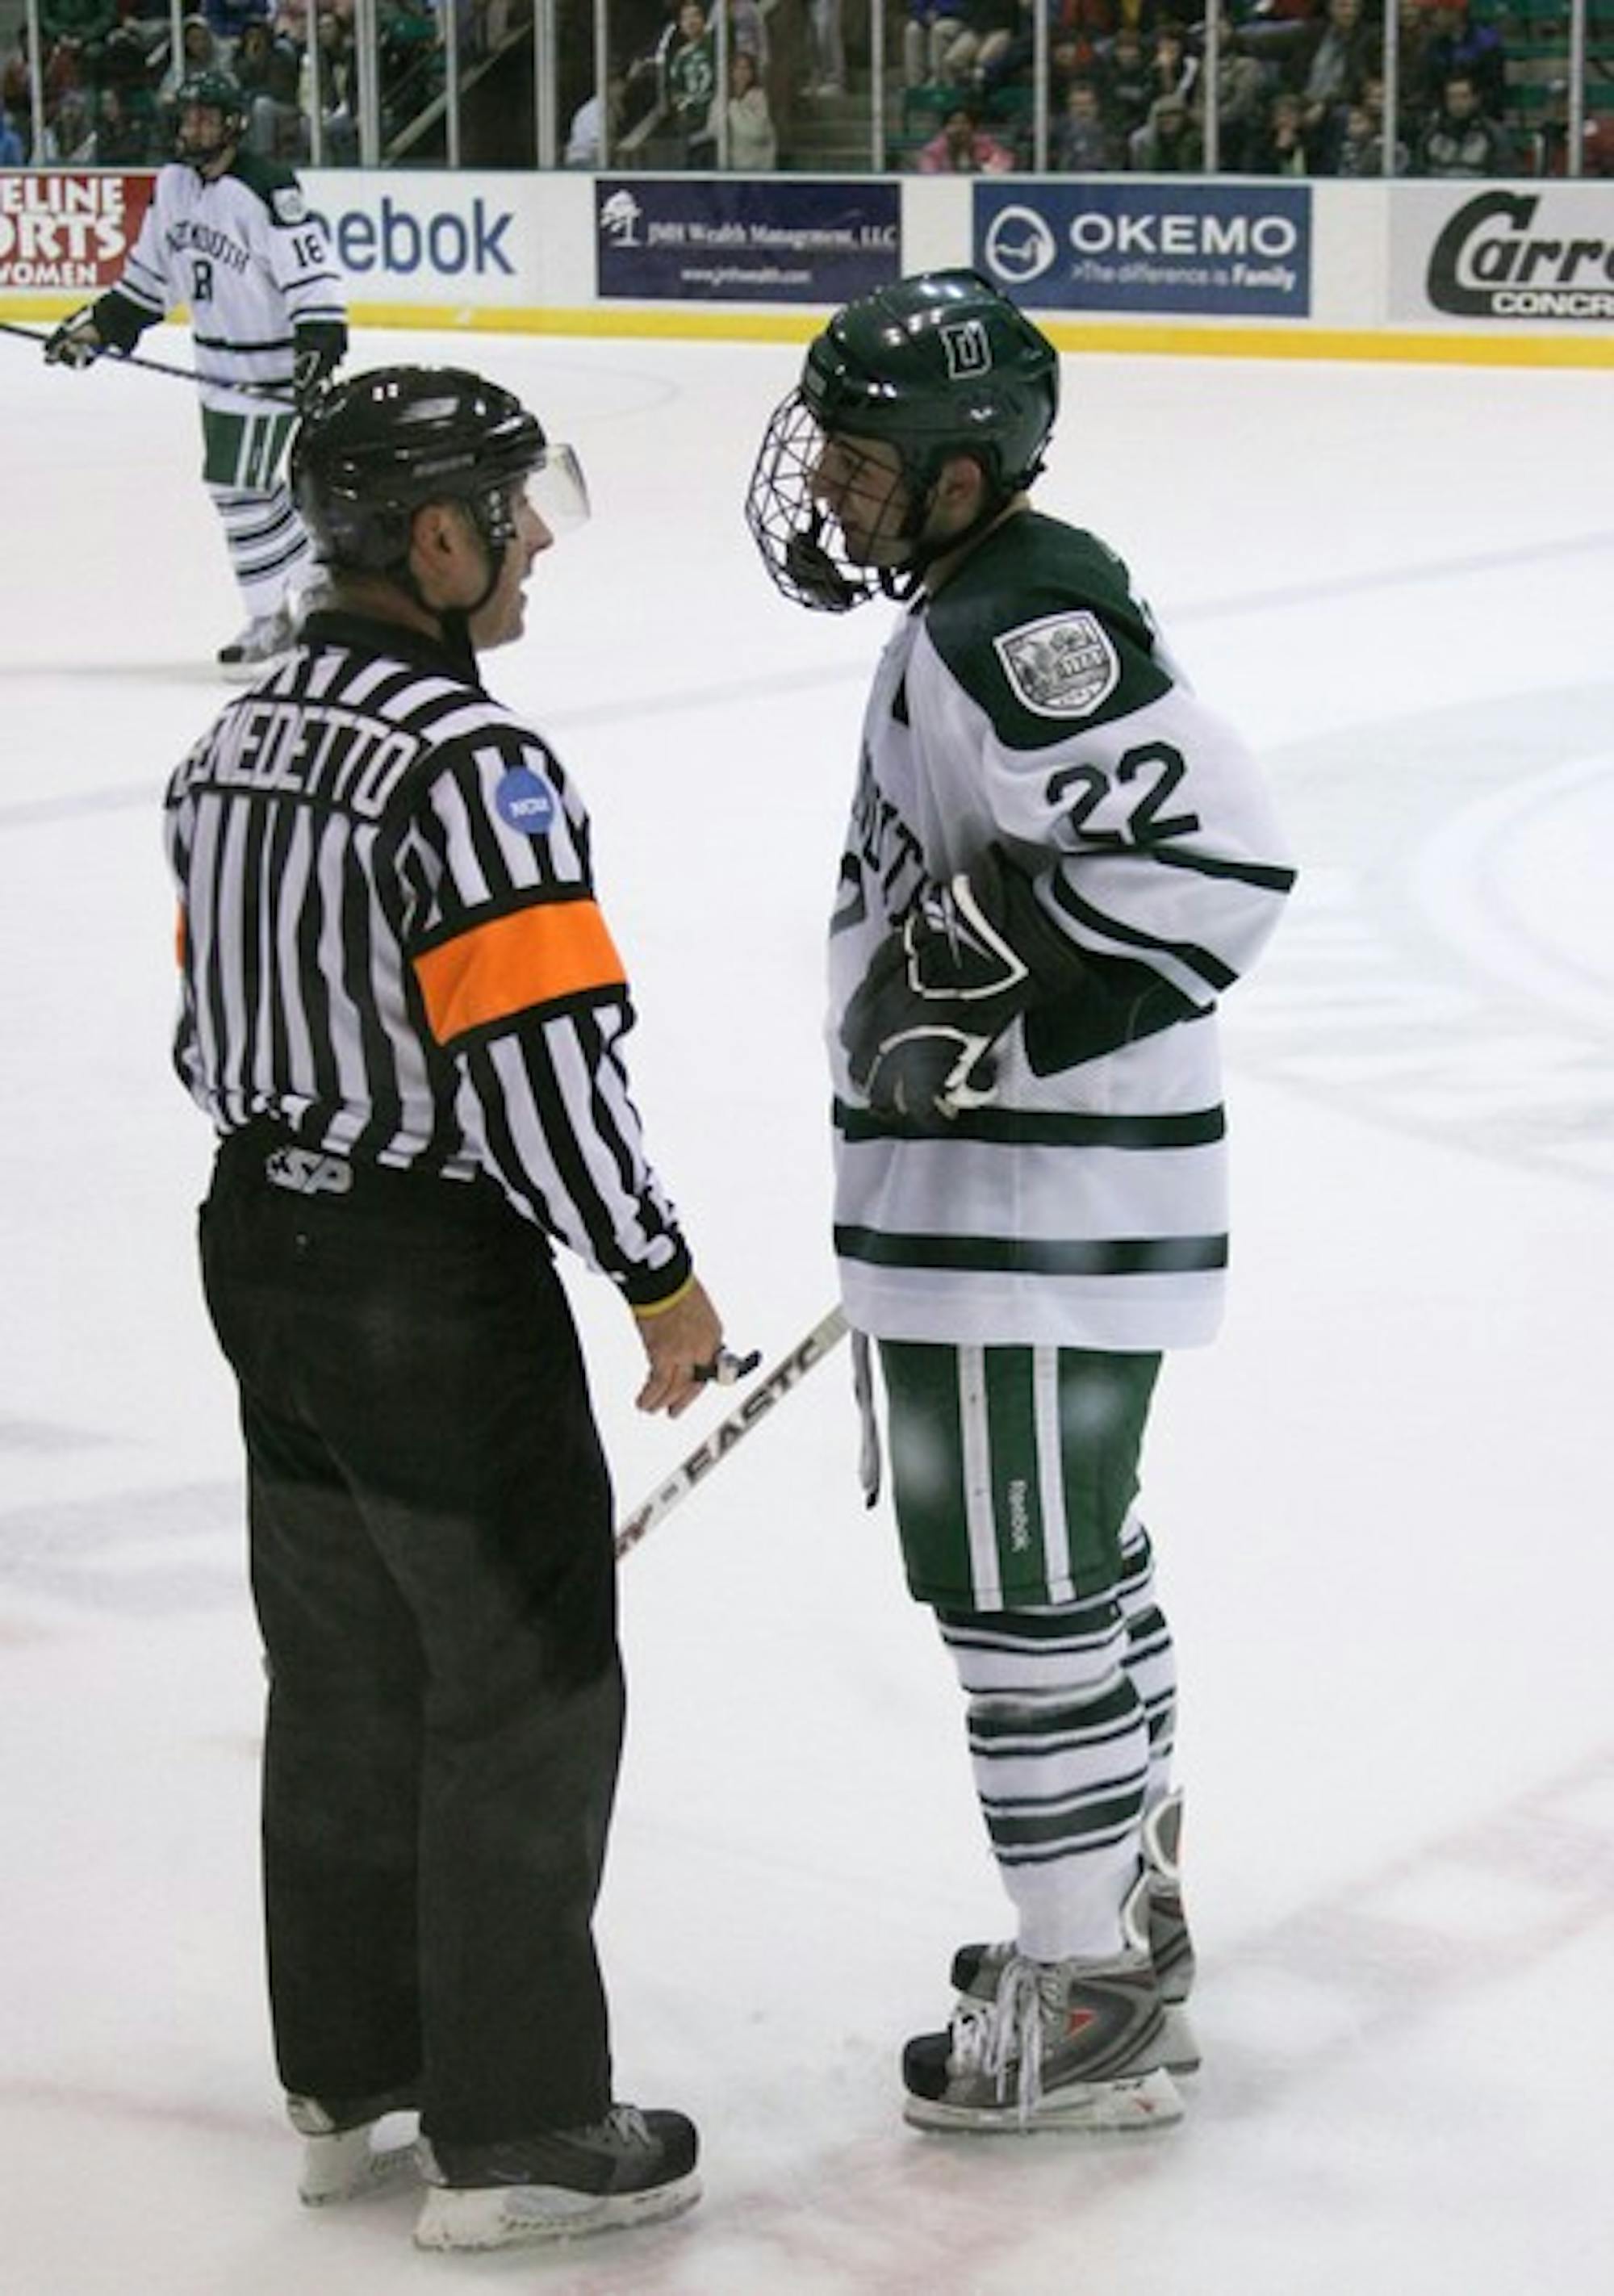 Captain Rob Pritchard '09 pleads with the referee after Boston College tied Sunday's home game with a questionable third period goal before going on to win, 2-1, in overtime, one night after Dartmouth downed Providence College, 4-2.